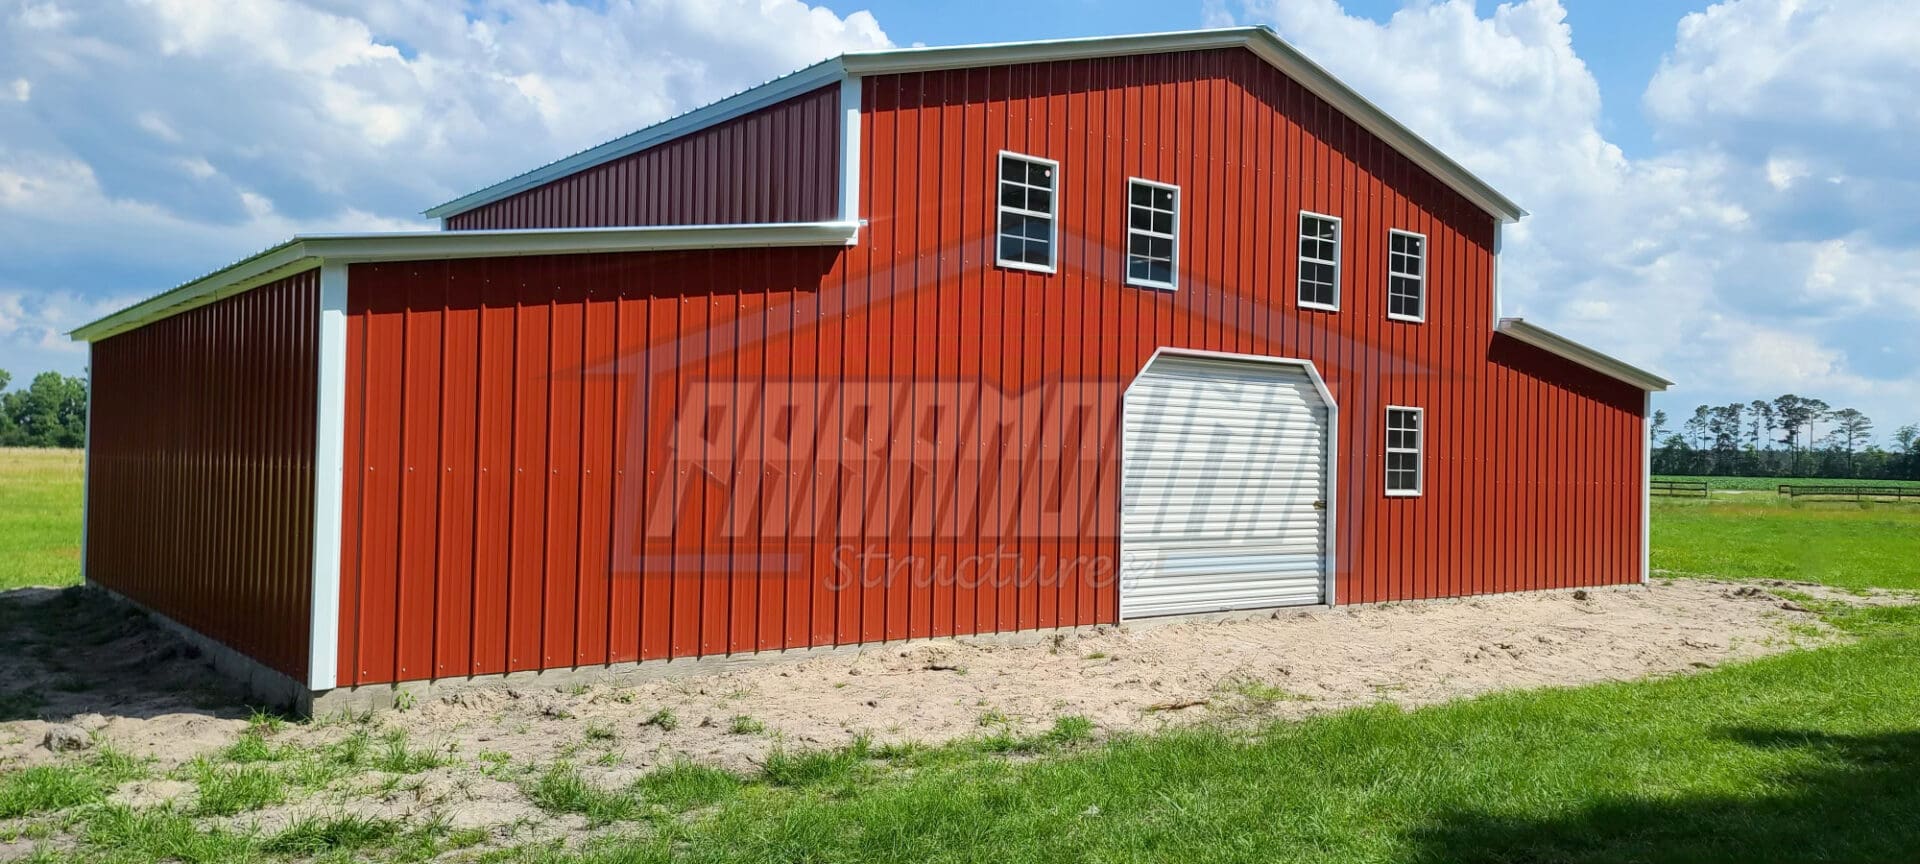 A red barn with two windows and a white door.